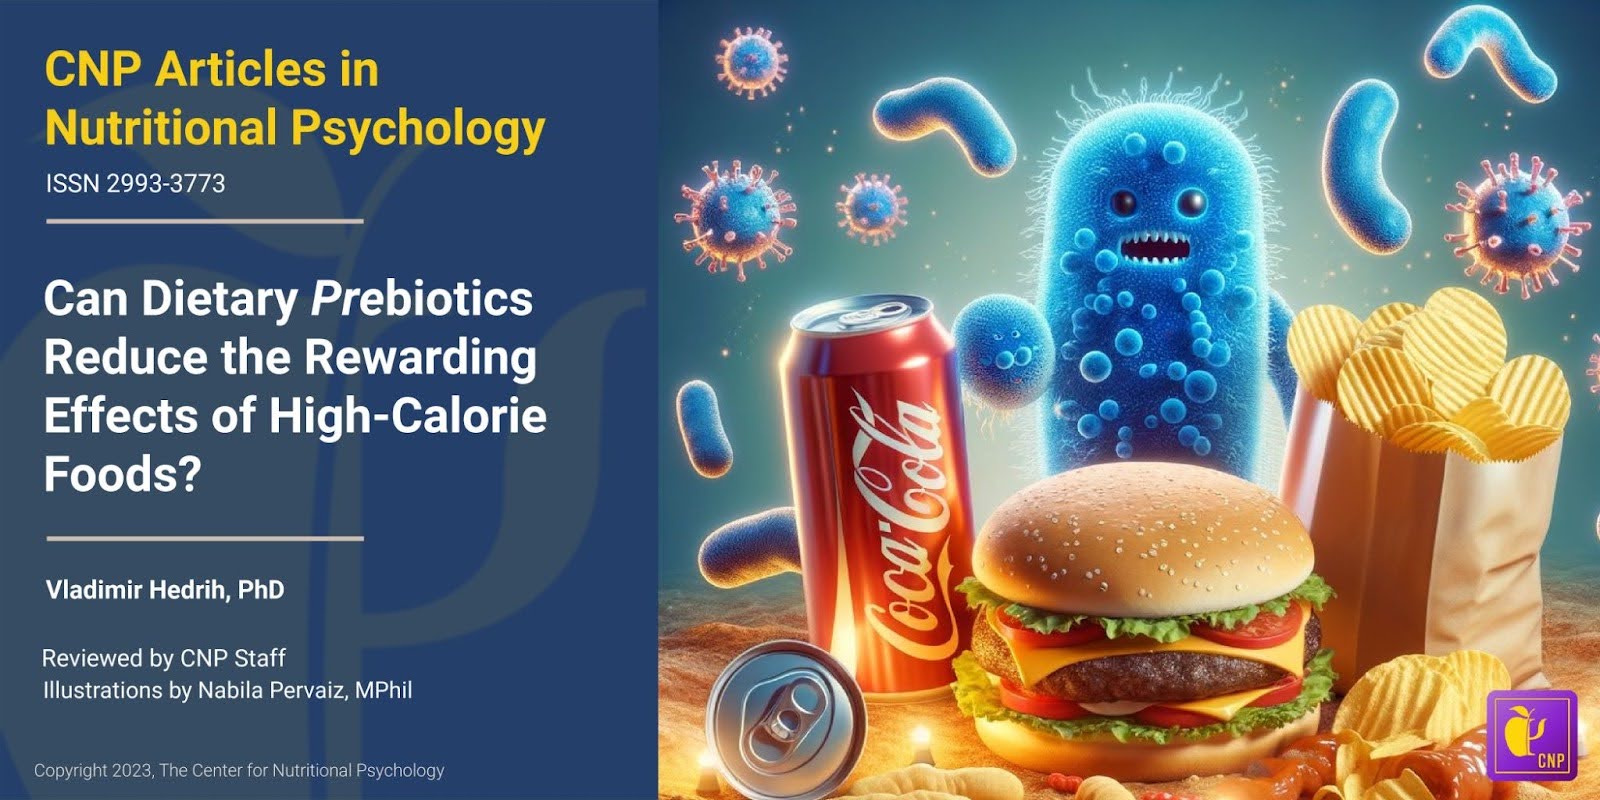 Can Dietary Prebiotics Reduce the Rewarding Effects of High-Calorie Foods?